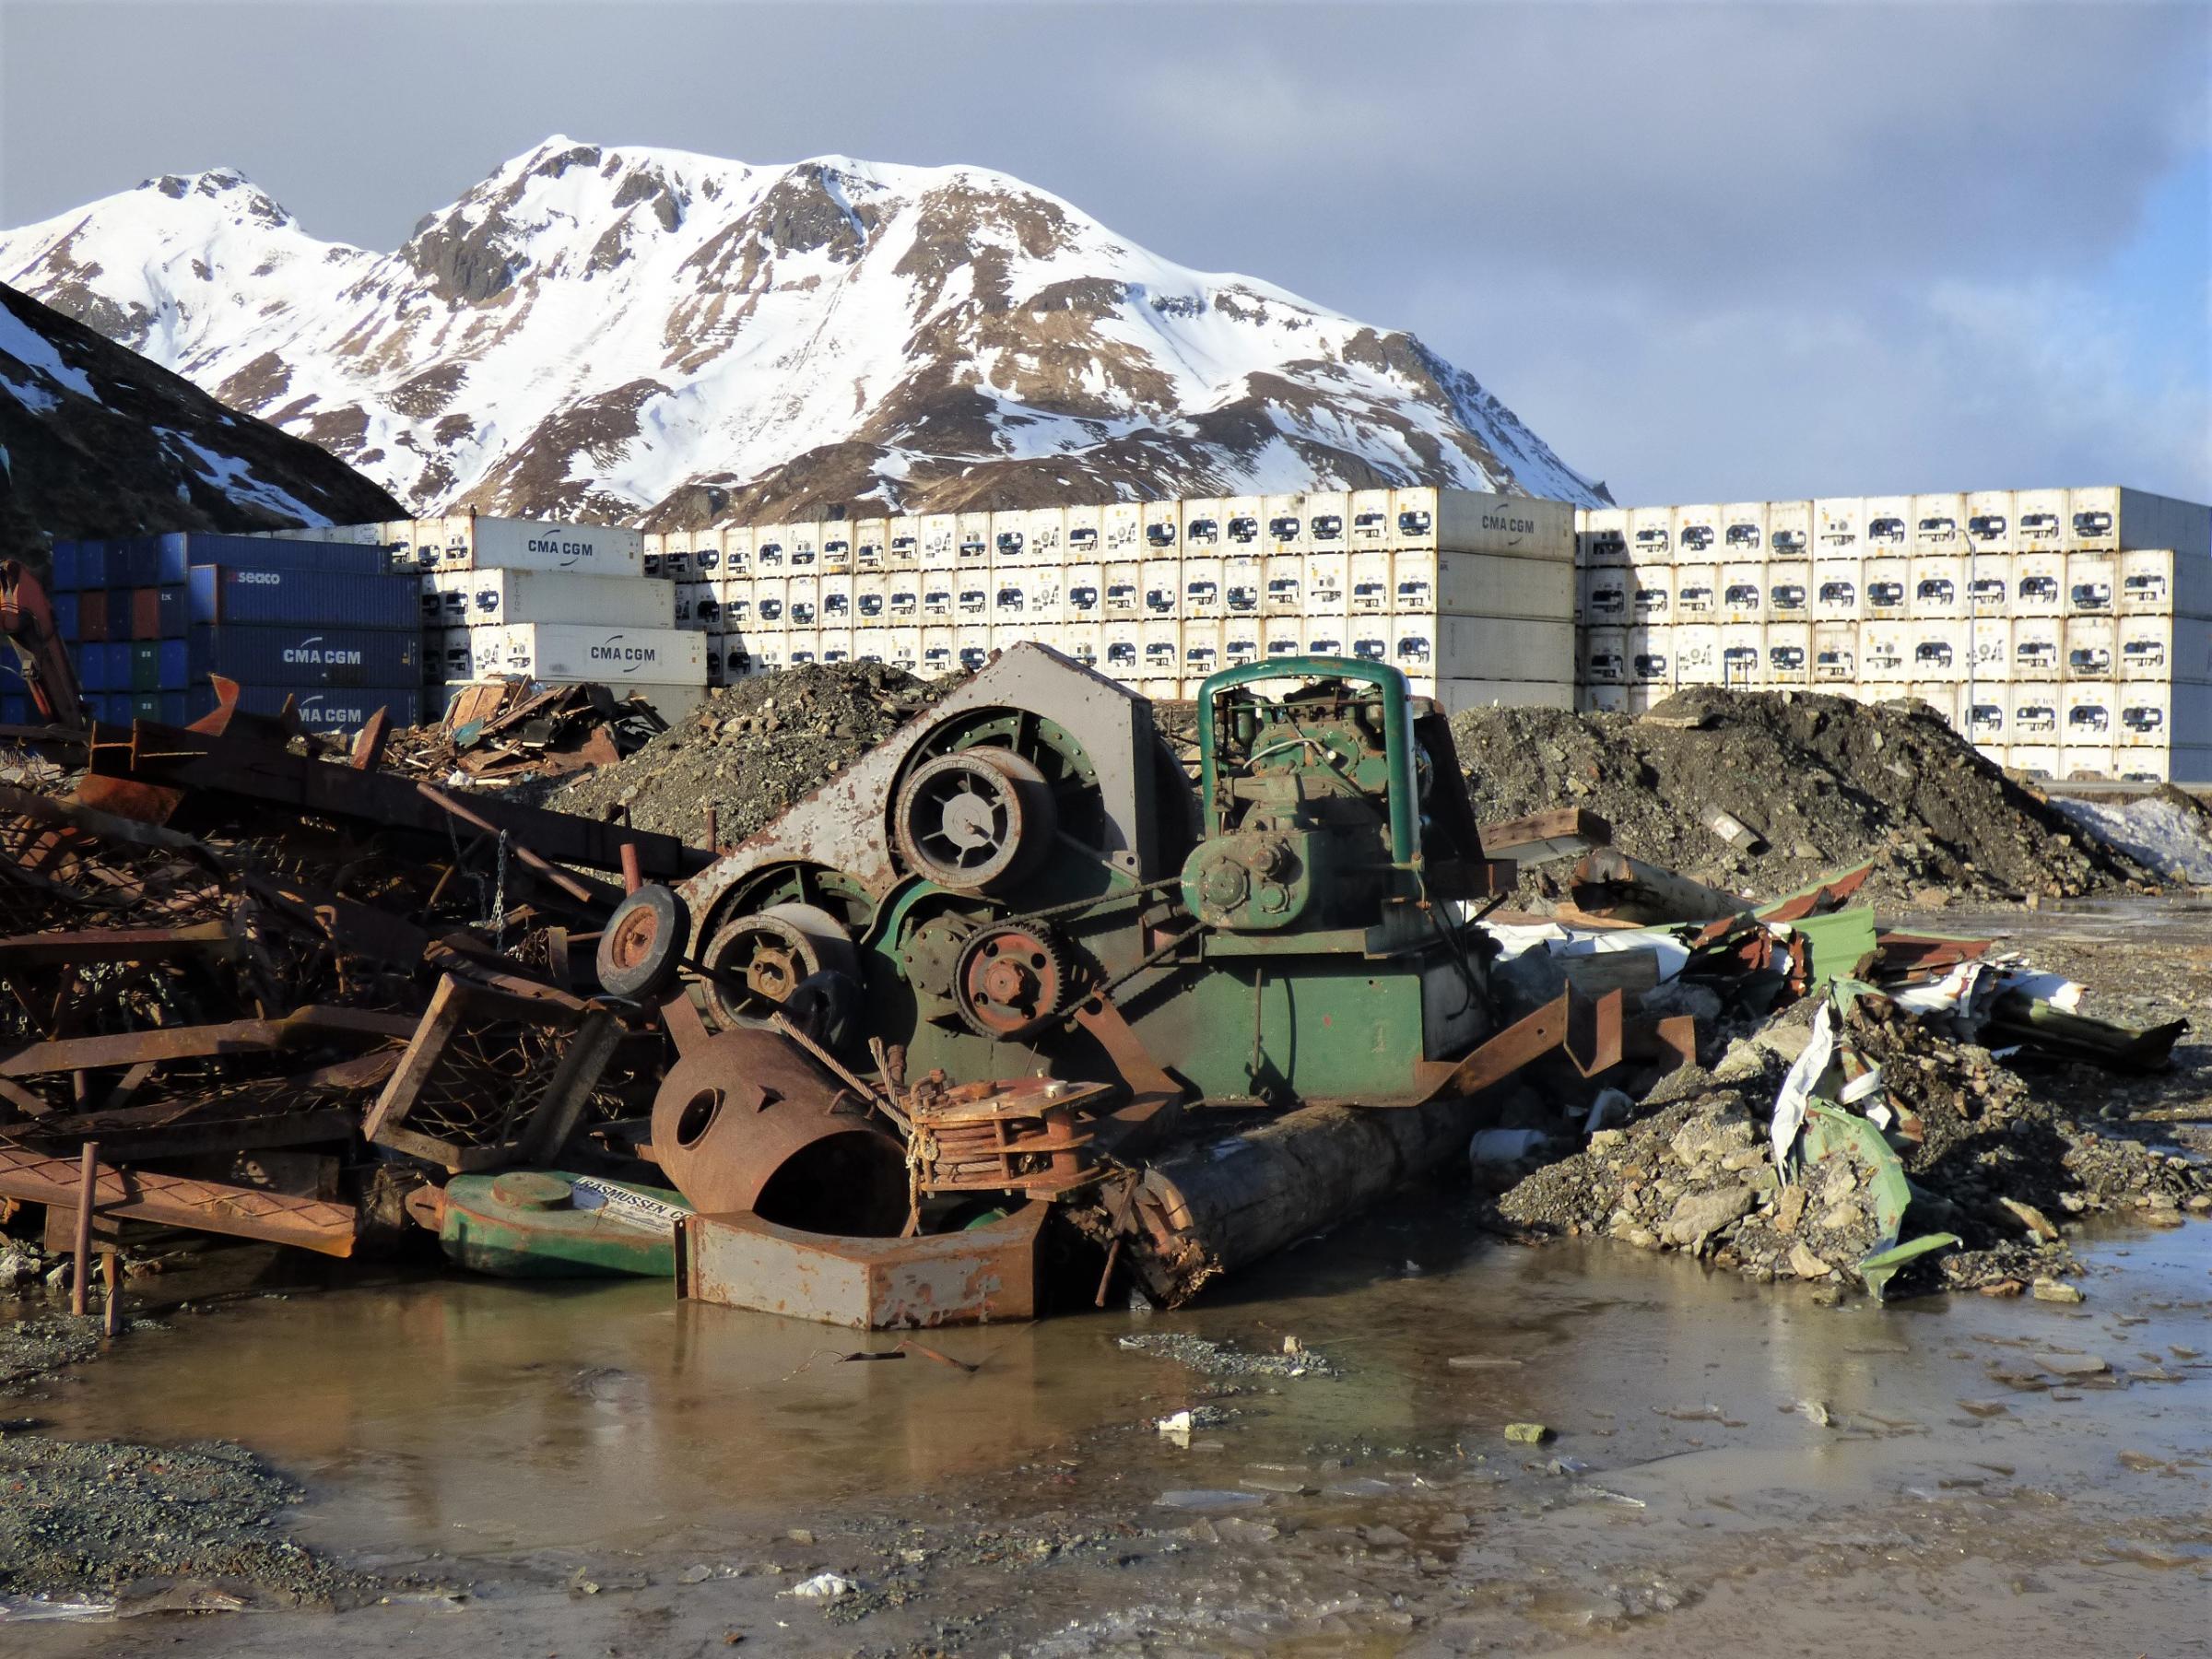 Long before it was demolished, the Navy used this carriage to reel boats out of the Bering Sea. (Photo by Laura Kraegel/KUCB)